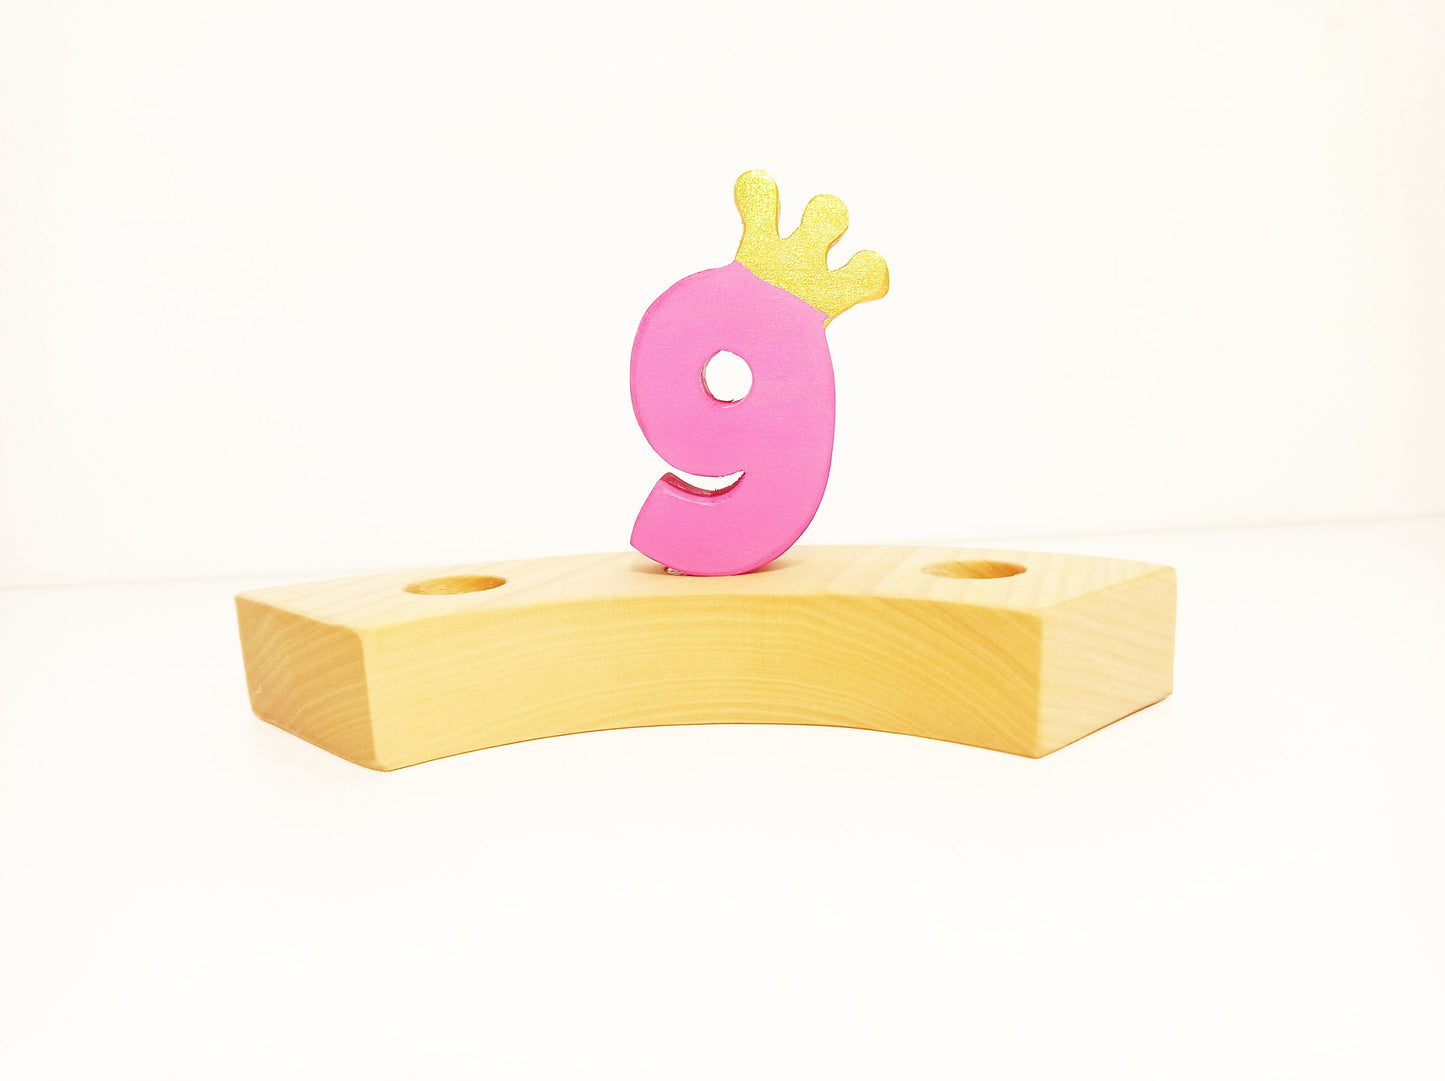 Number 9 birthday ring ornament, waldorf ring ornament, waldorf decoration, birthday ring, birthday decorations, waldorf numbers, jaar ring